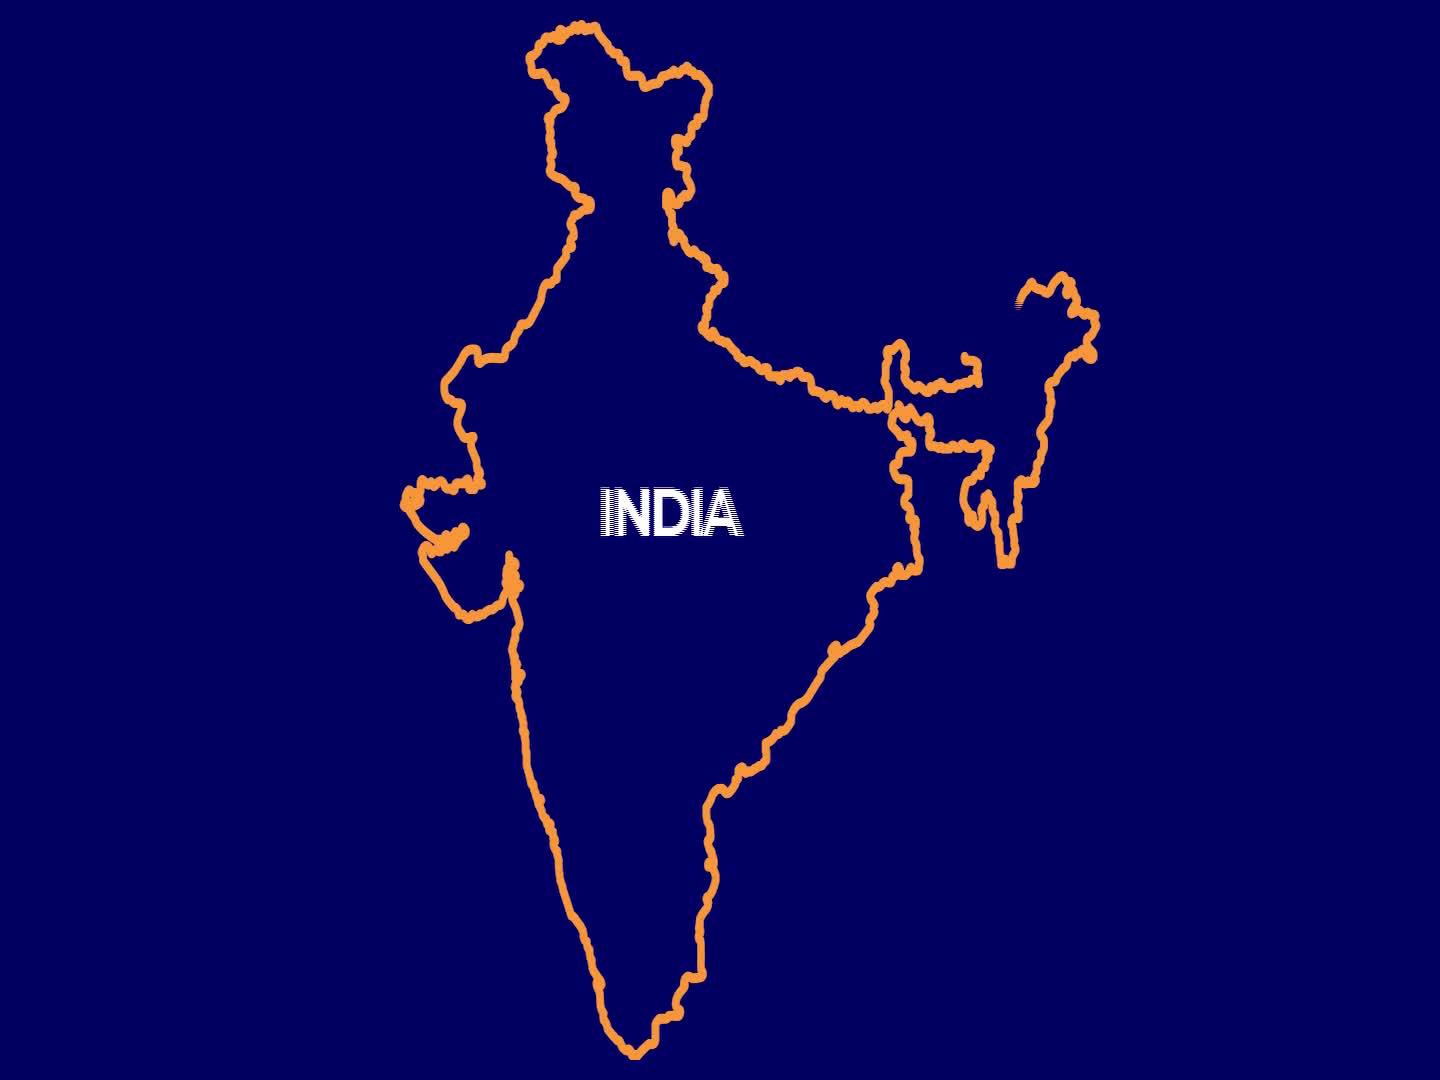 India Map Stock Video Footage for Free Download